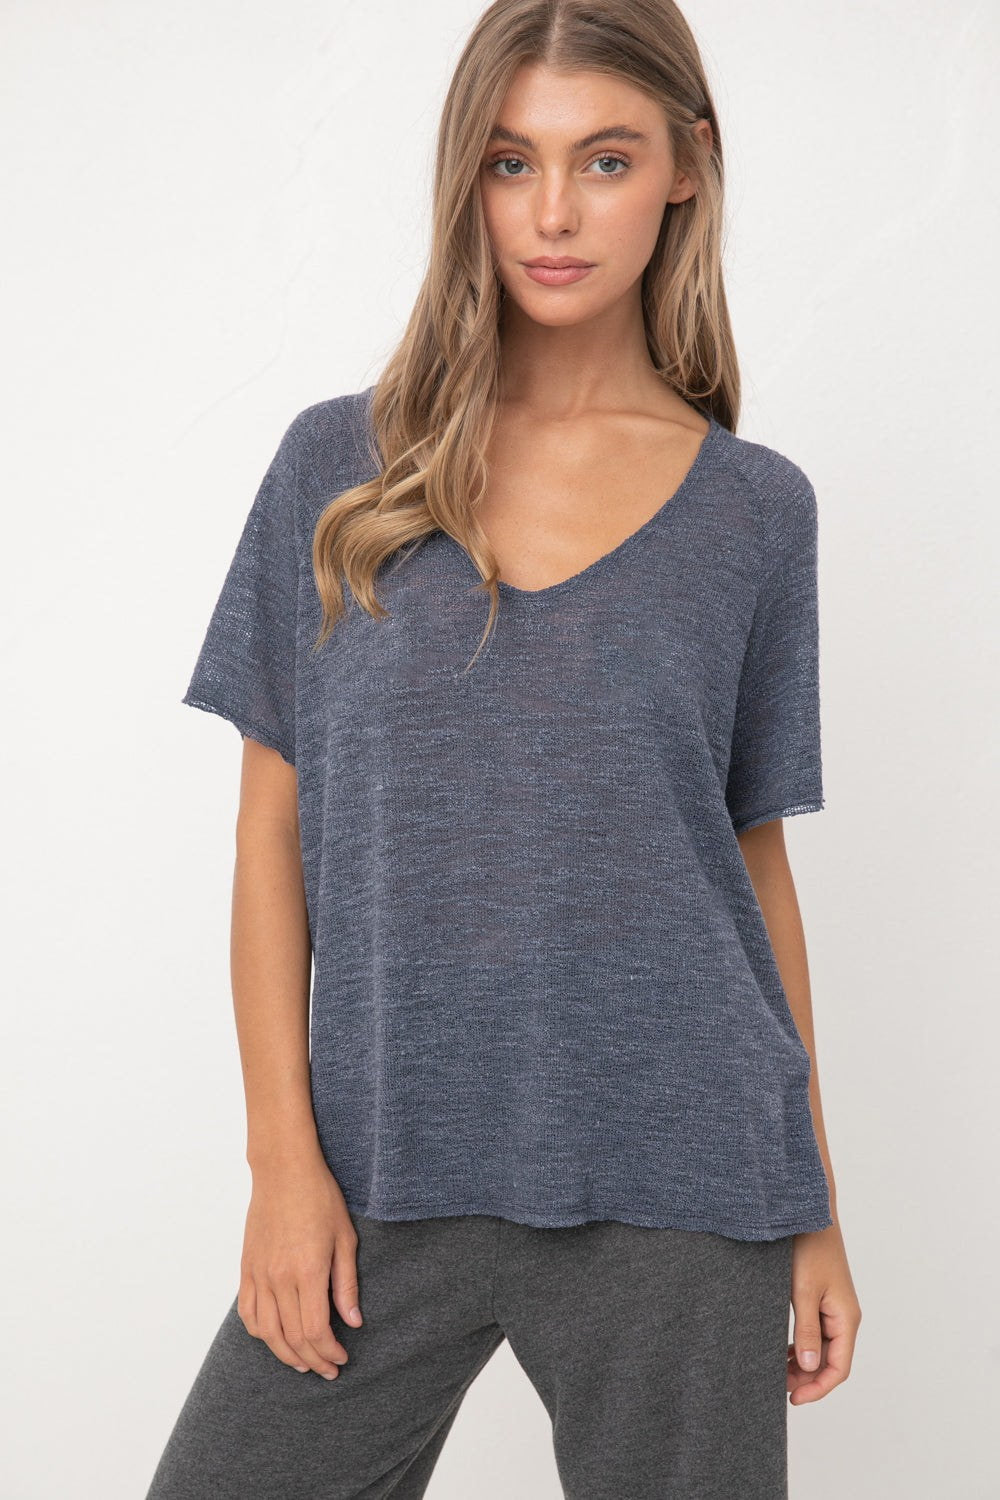 Denim Slubby V Neck Top, Tops by Wasabi and Mint | LIT Boutique